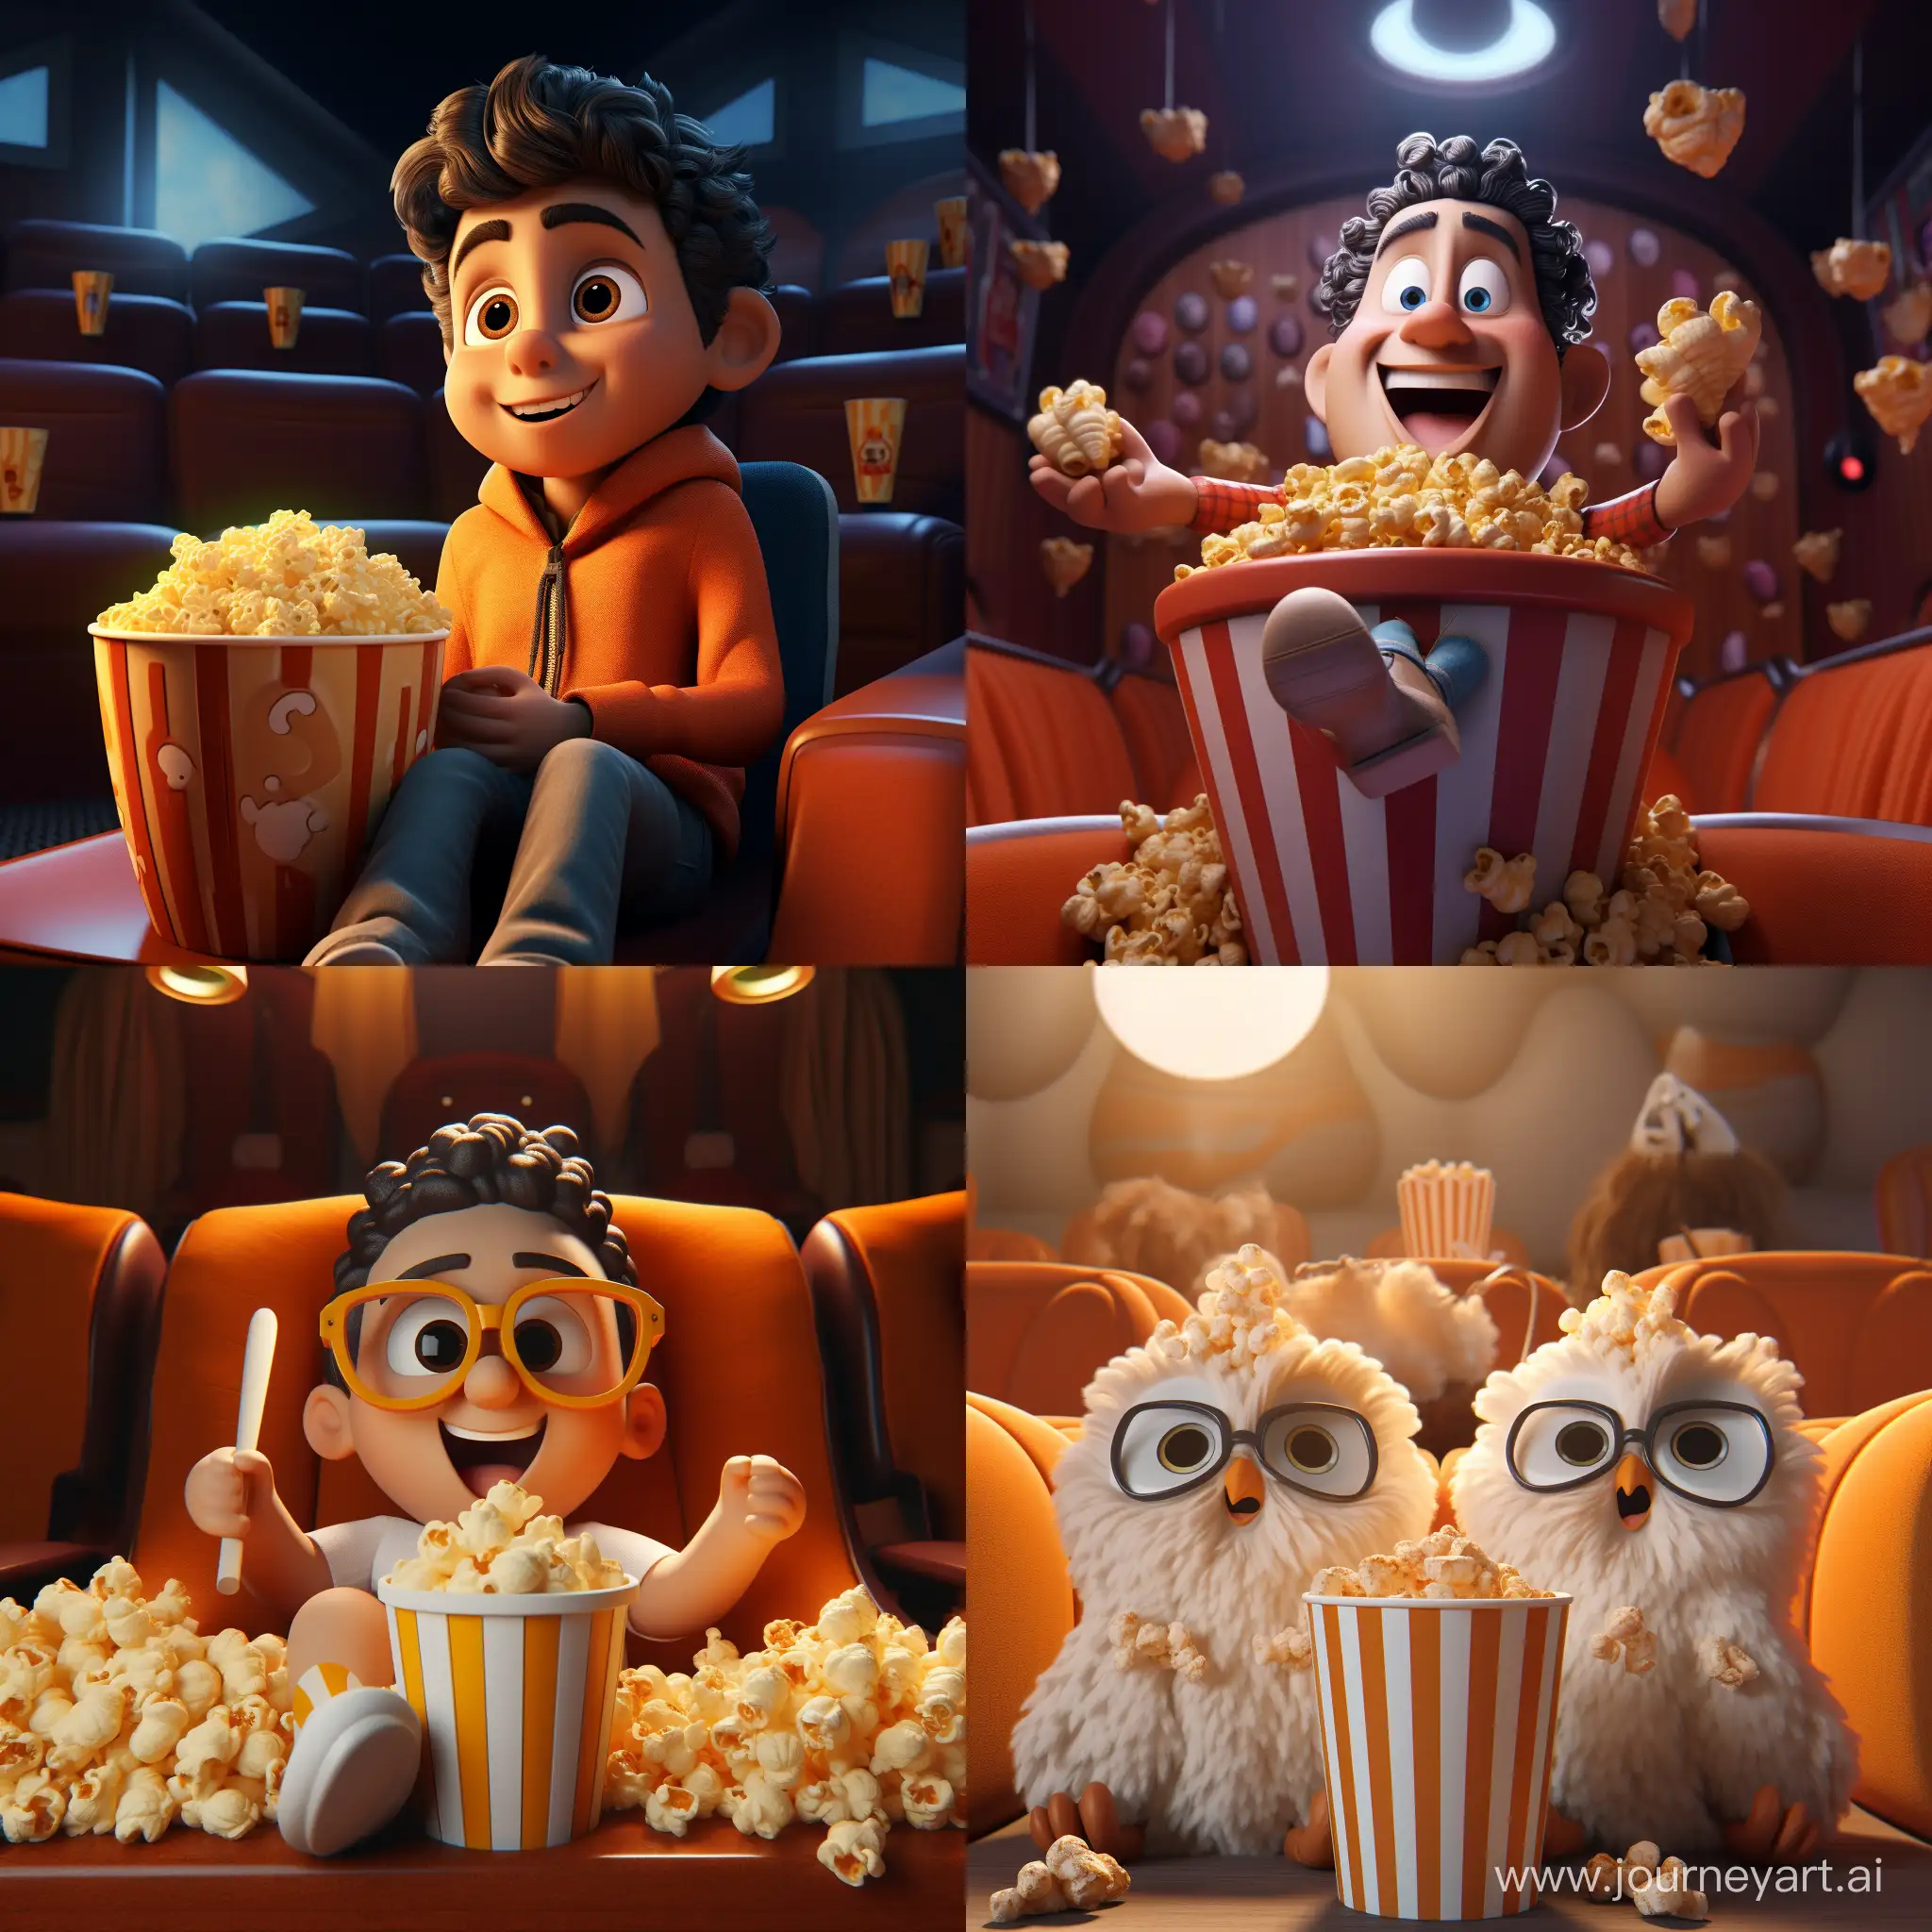 Curious-Popcorn-Delights-in-3D-Animation-Movie-Theater-Experience